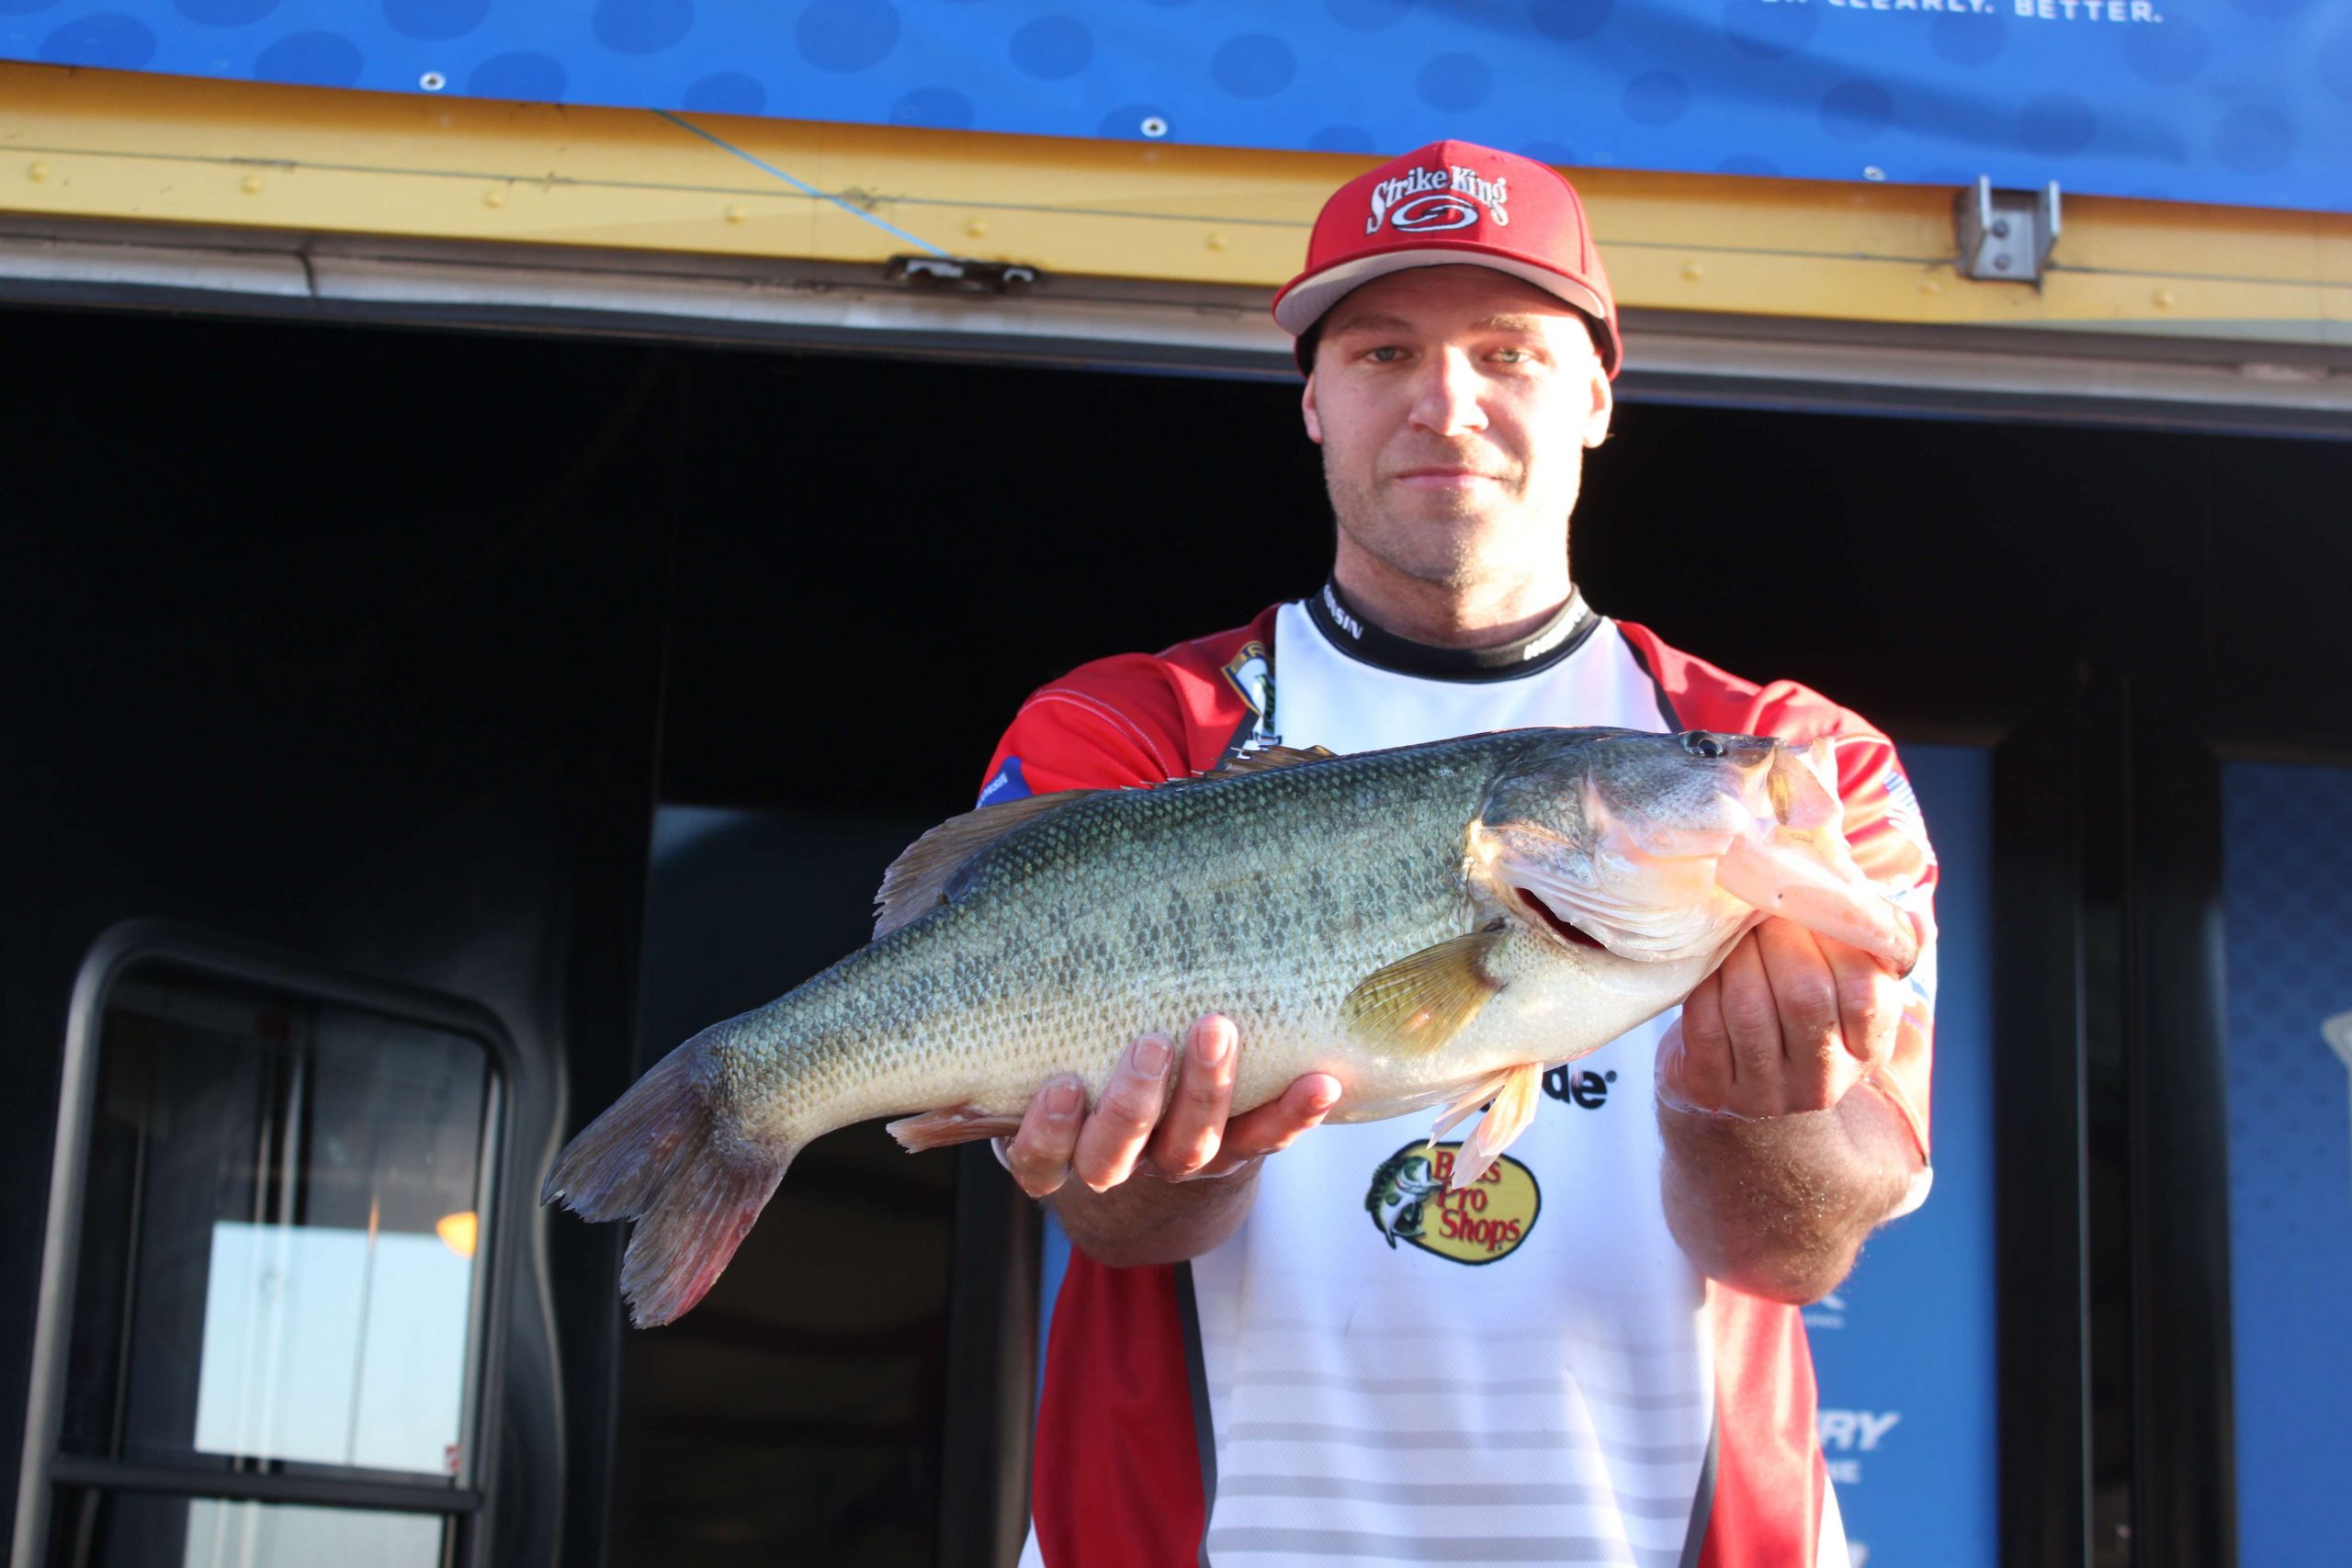 Josh Crededio of Team Wisconsin is in third place among non-boaters with three bass going for 14-15.